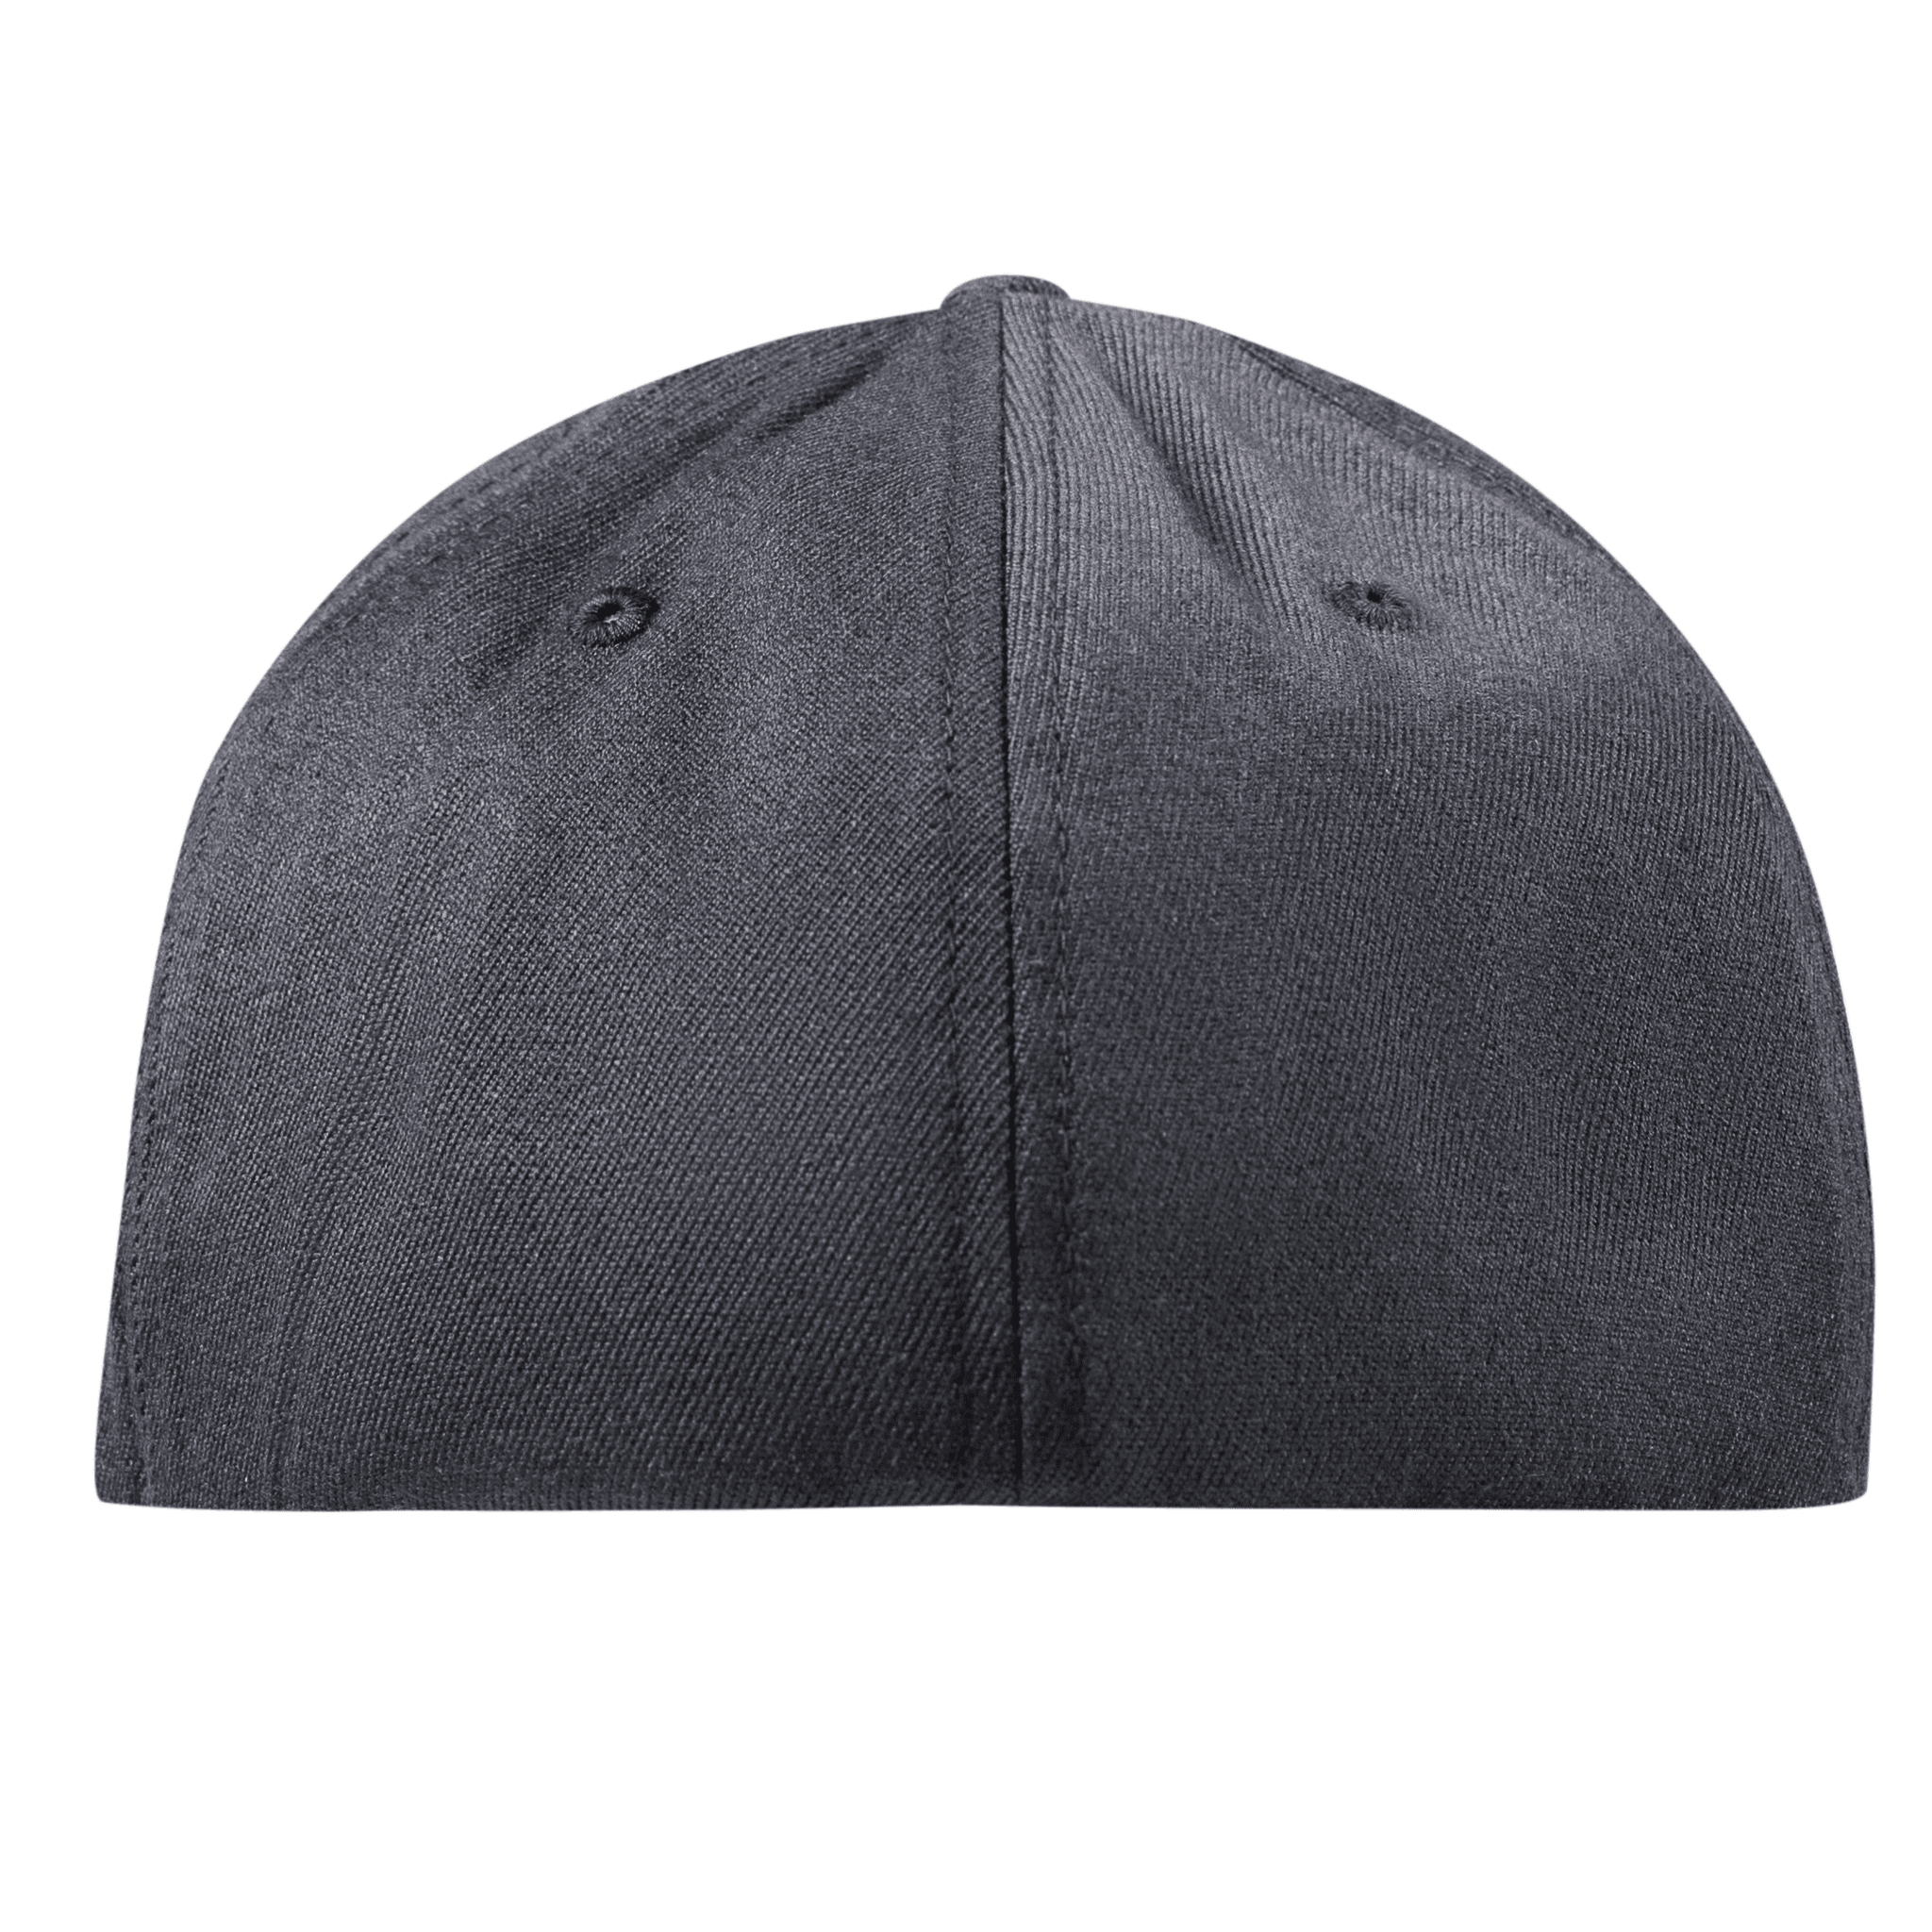 Oklahoma 46 Midnight Flexfit Fitted Back Charcoal